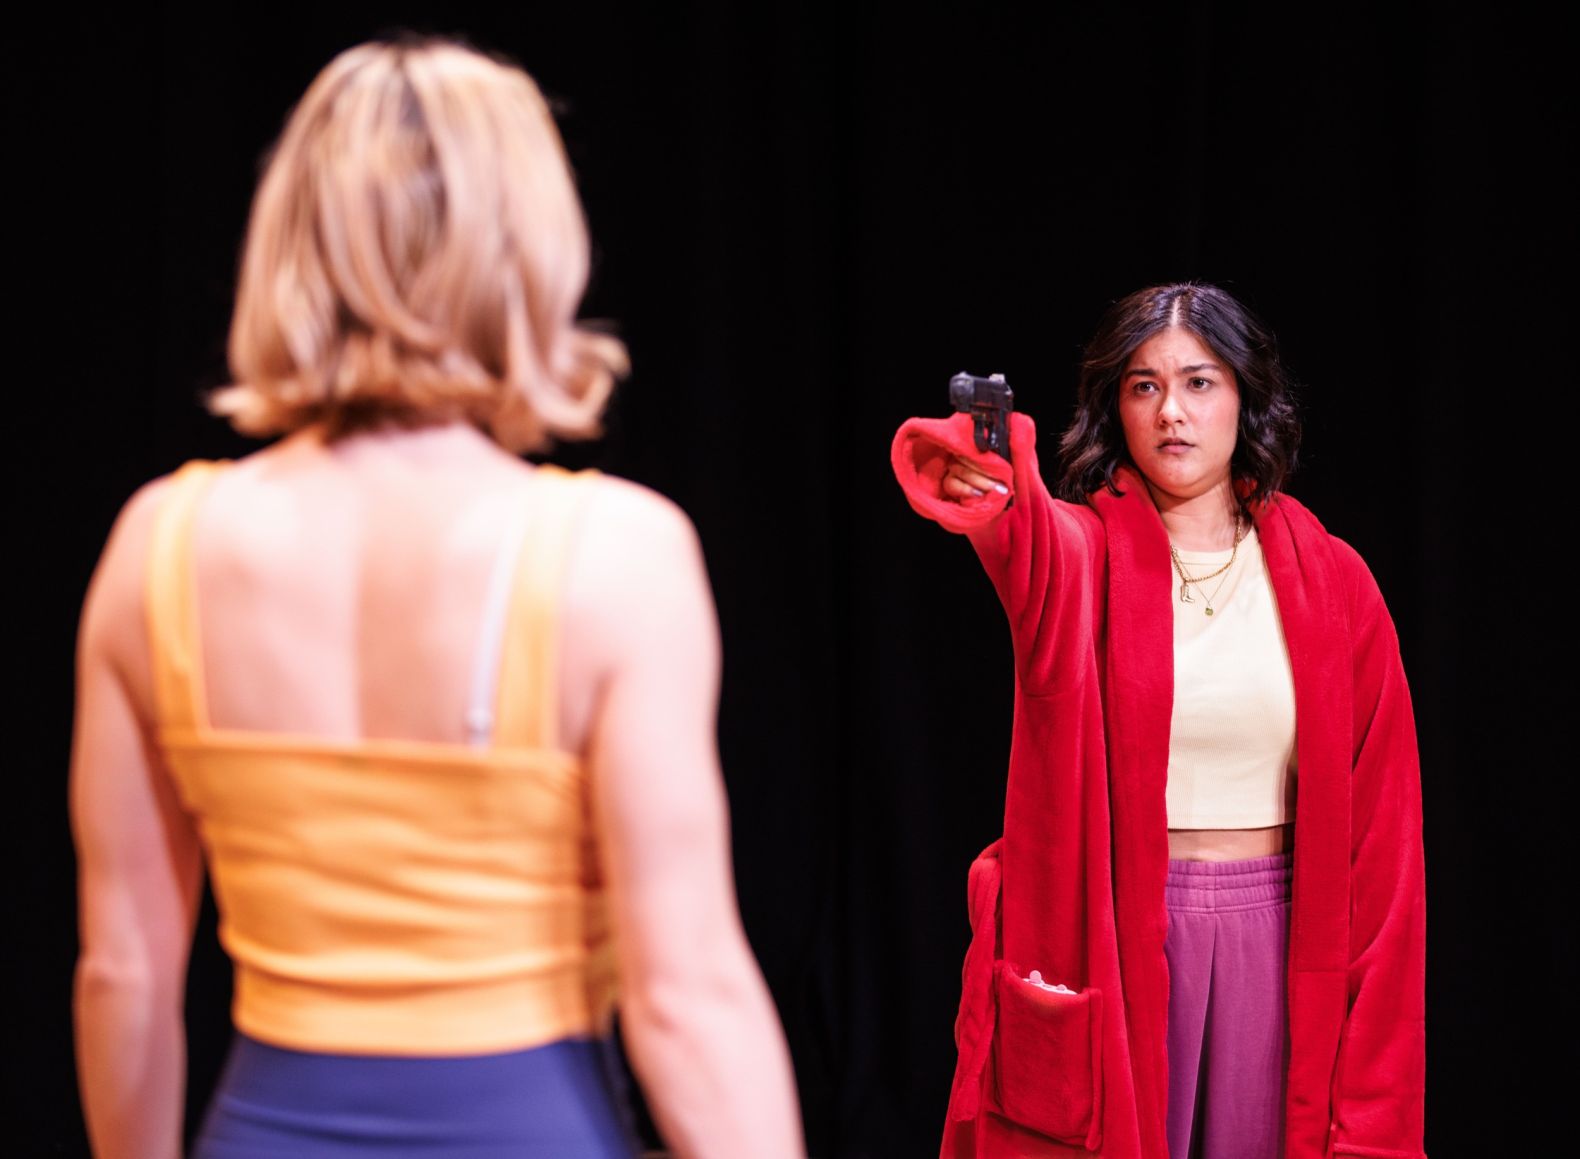 Production photo of Rotten by Emmerson & Ward - a woman in a red dressing gown is pointing a gun a young woman who has her back to camera